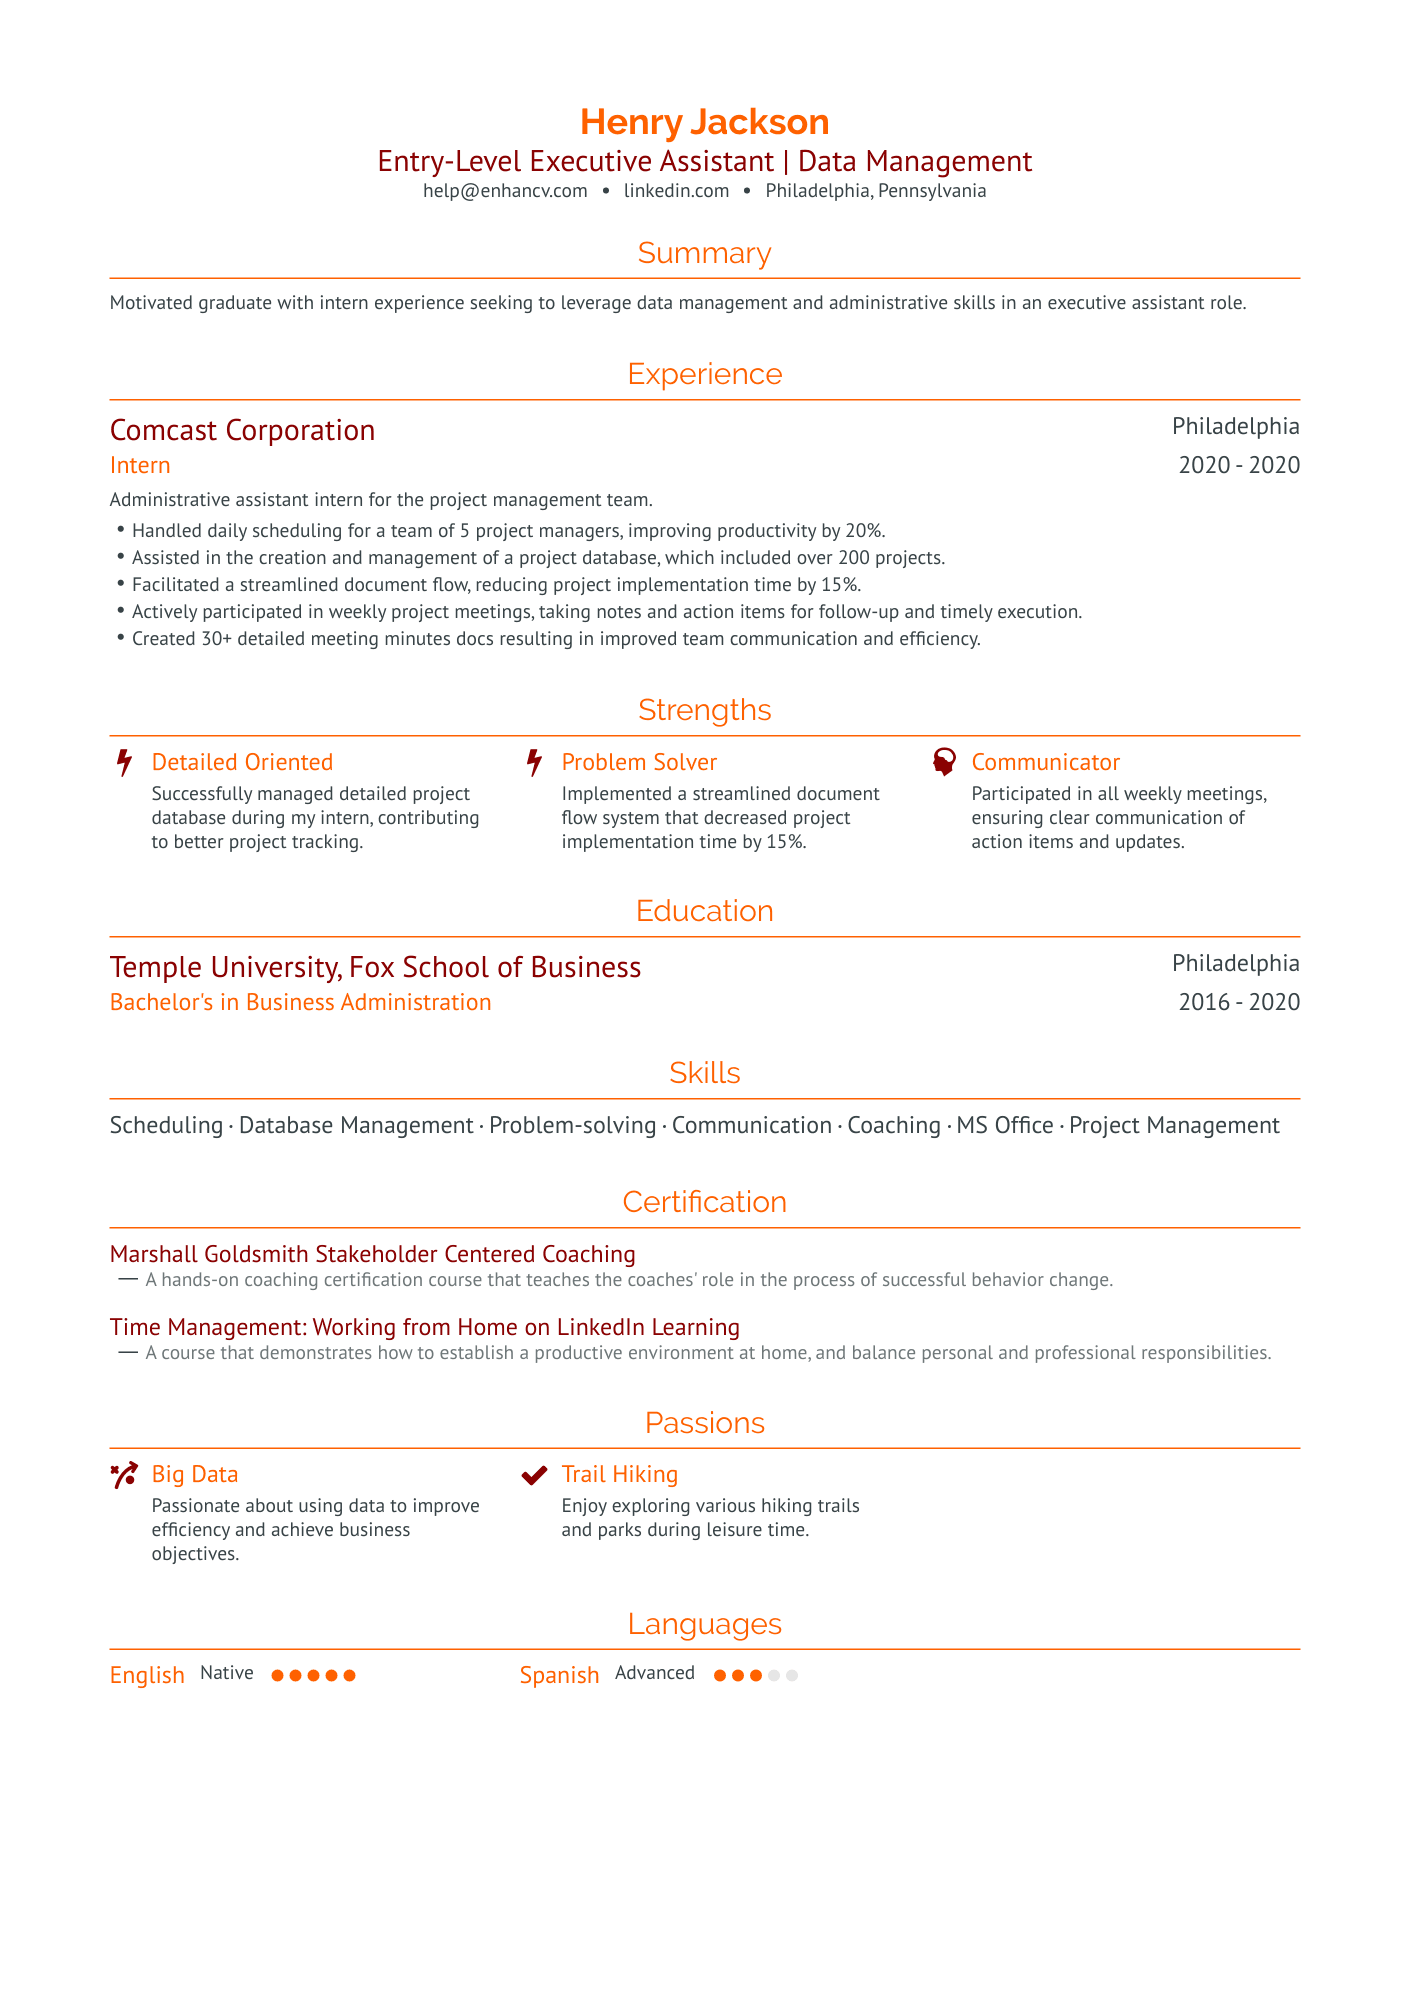 executive assistant resume template